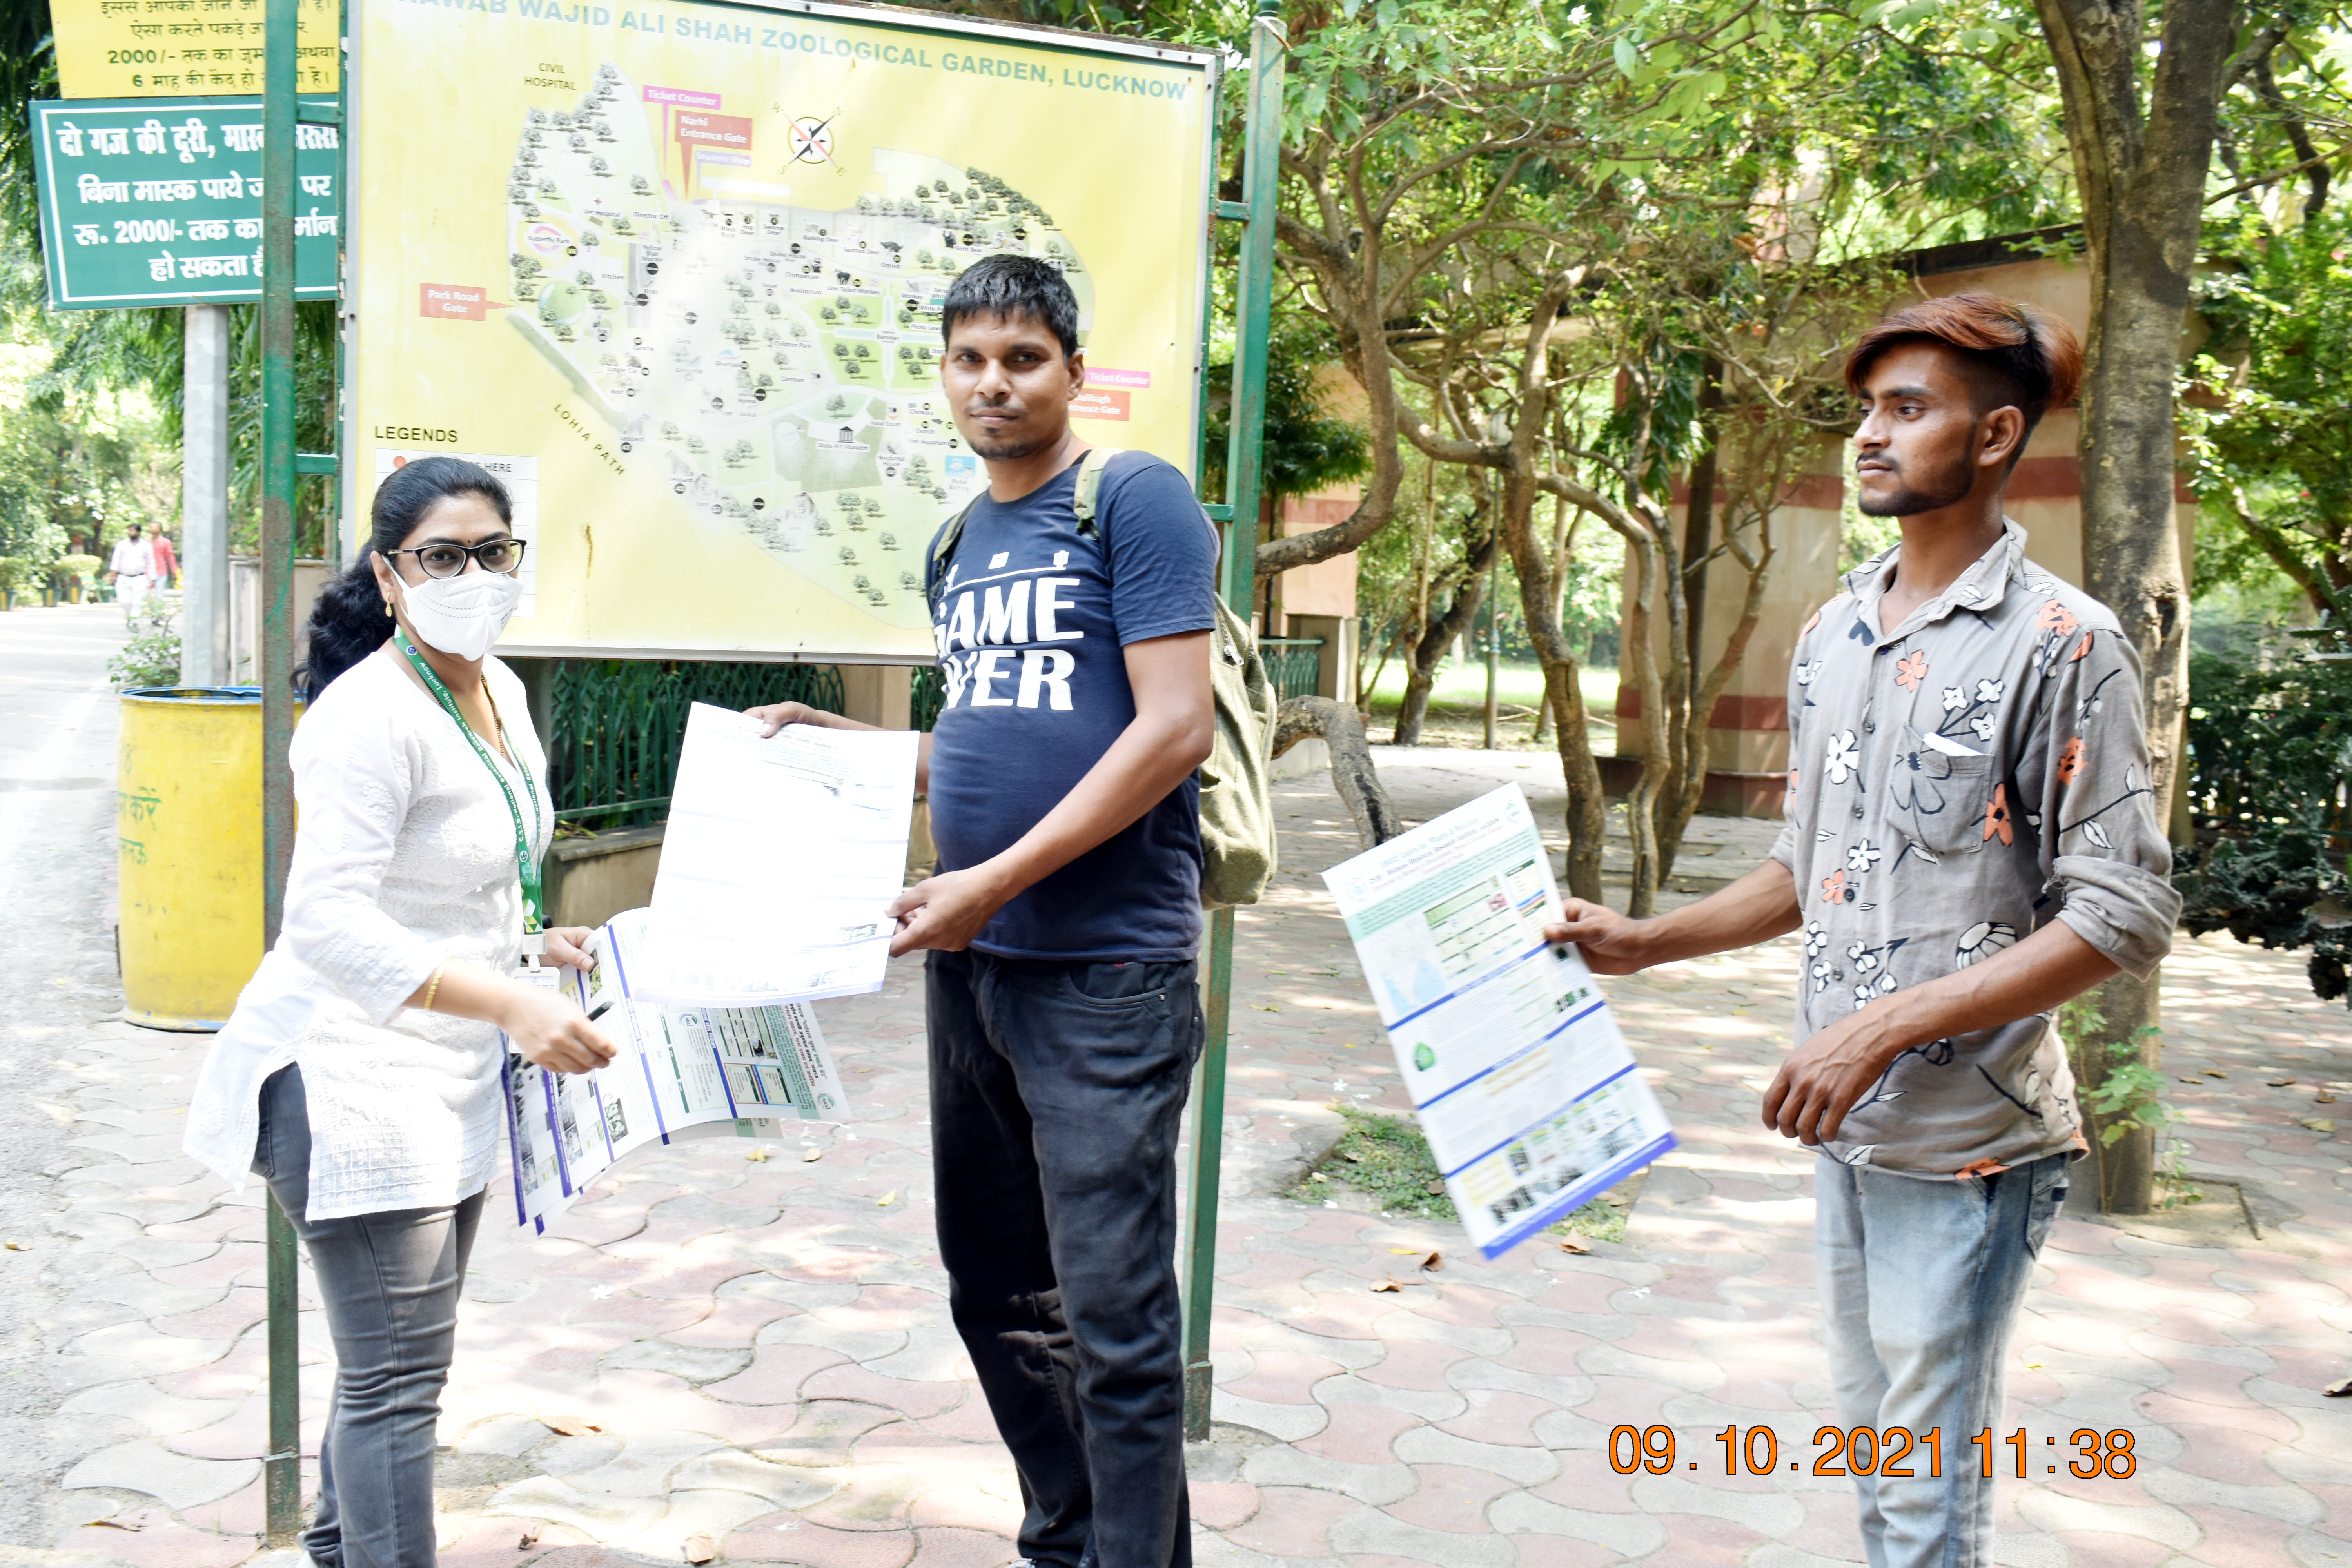 Campaign against single use plastics in Lucknow, Zoological Park